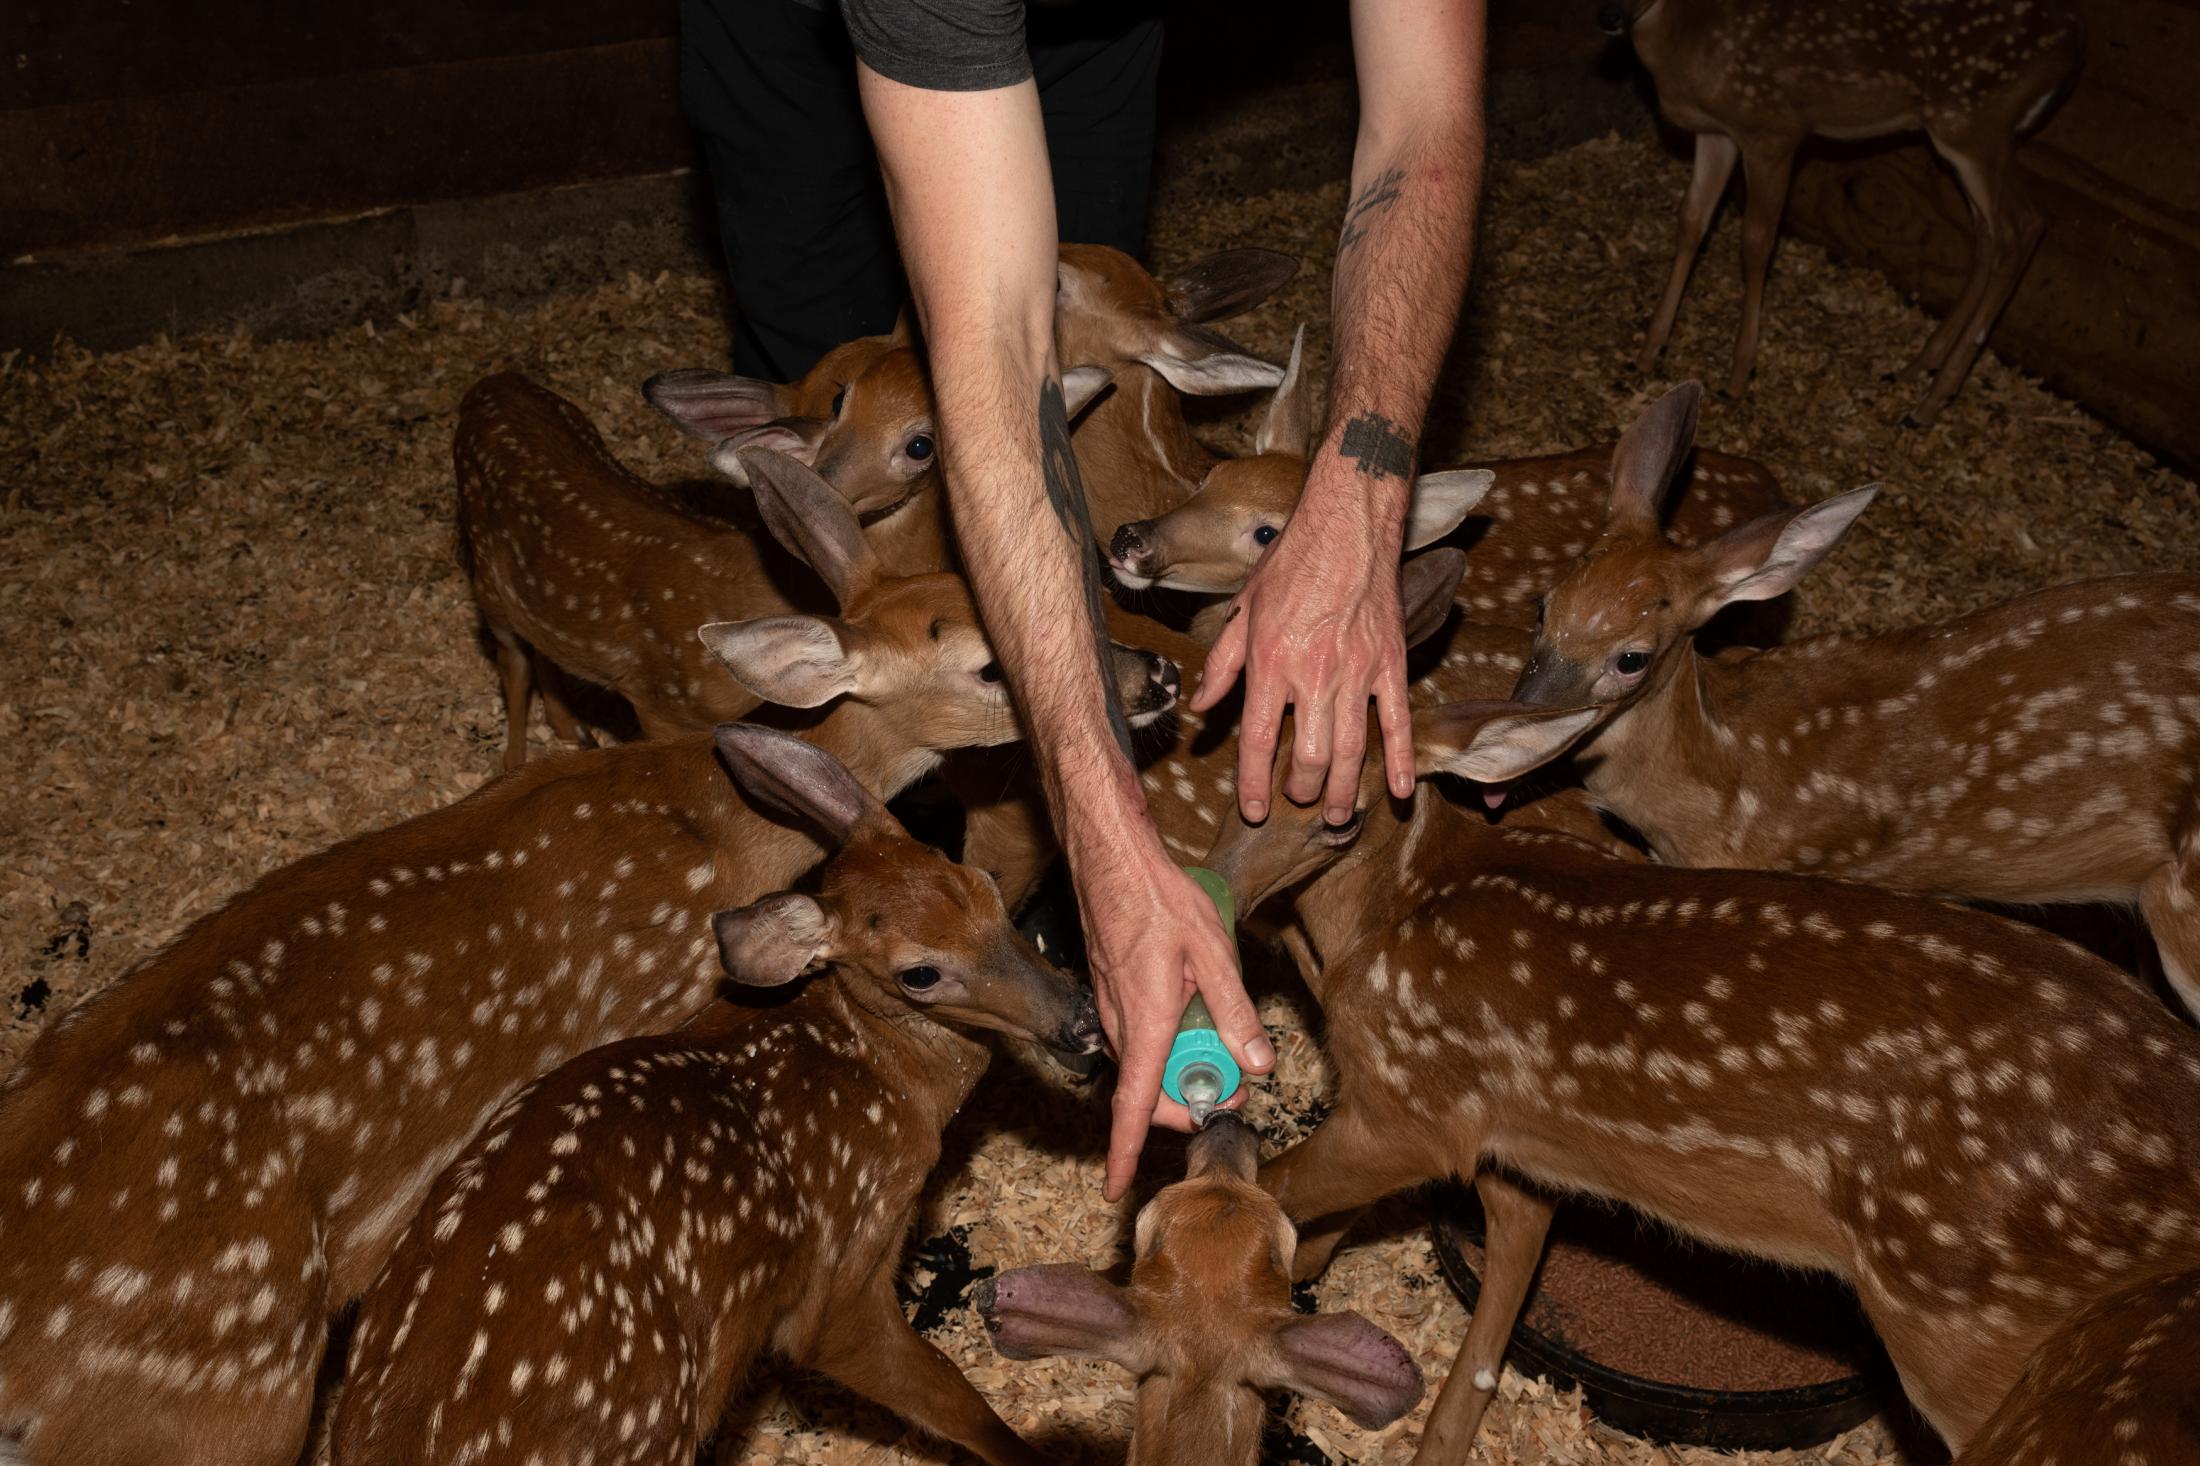 It Takes a Village - Patrick of Animal Nation, feeding fawns who were orphaned...